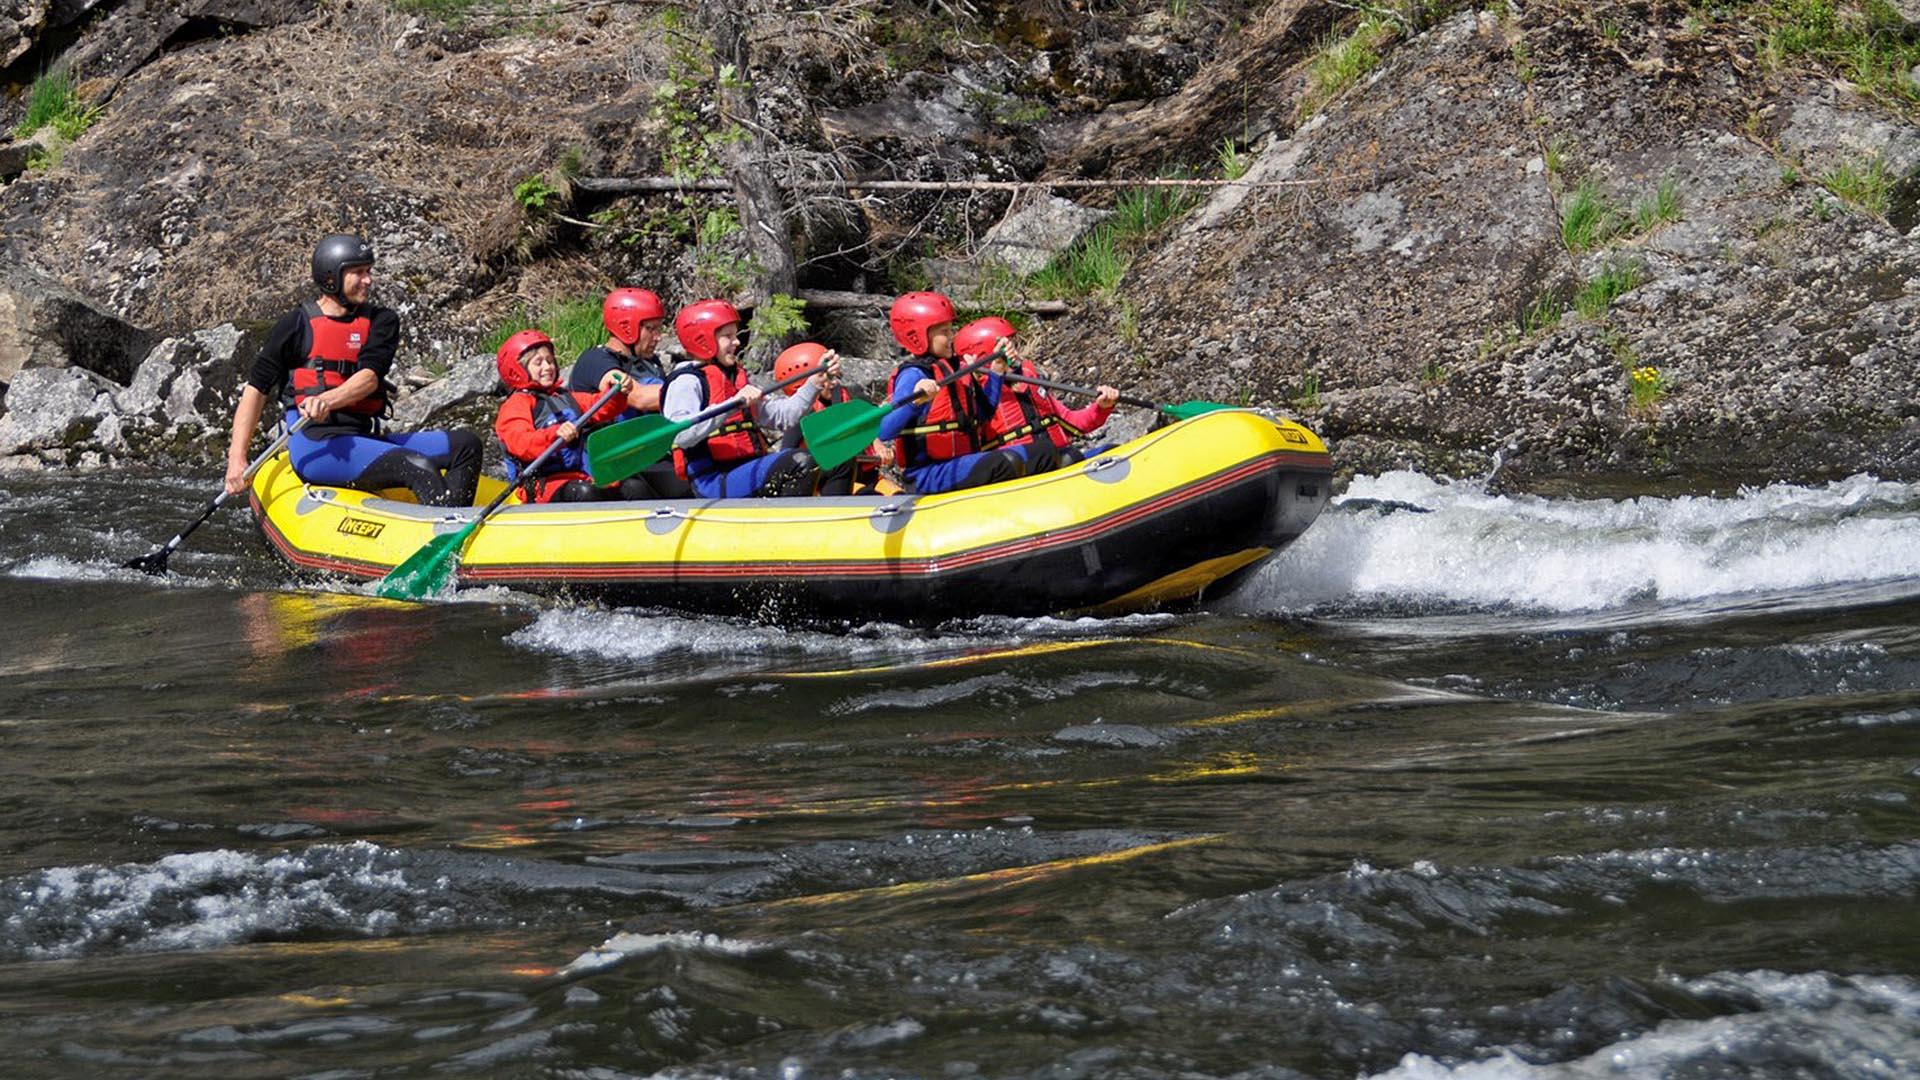 A raft with guide and kids on a river with kind rapids and smooth rocks on the bank.